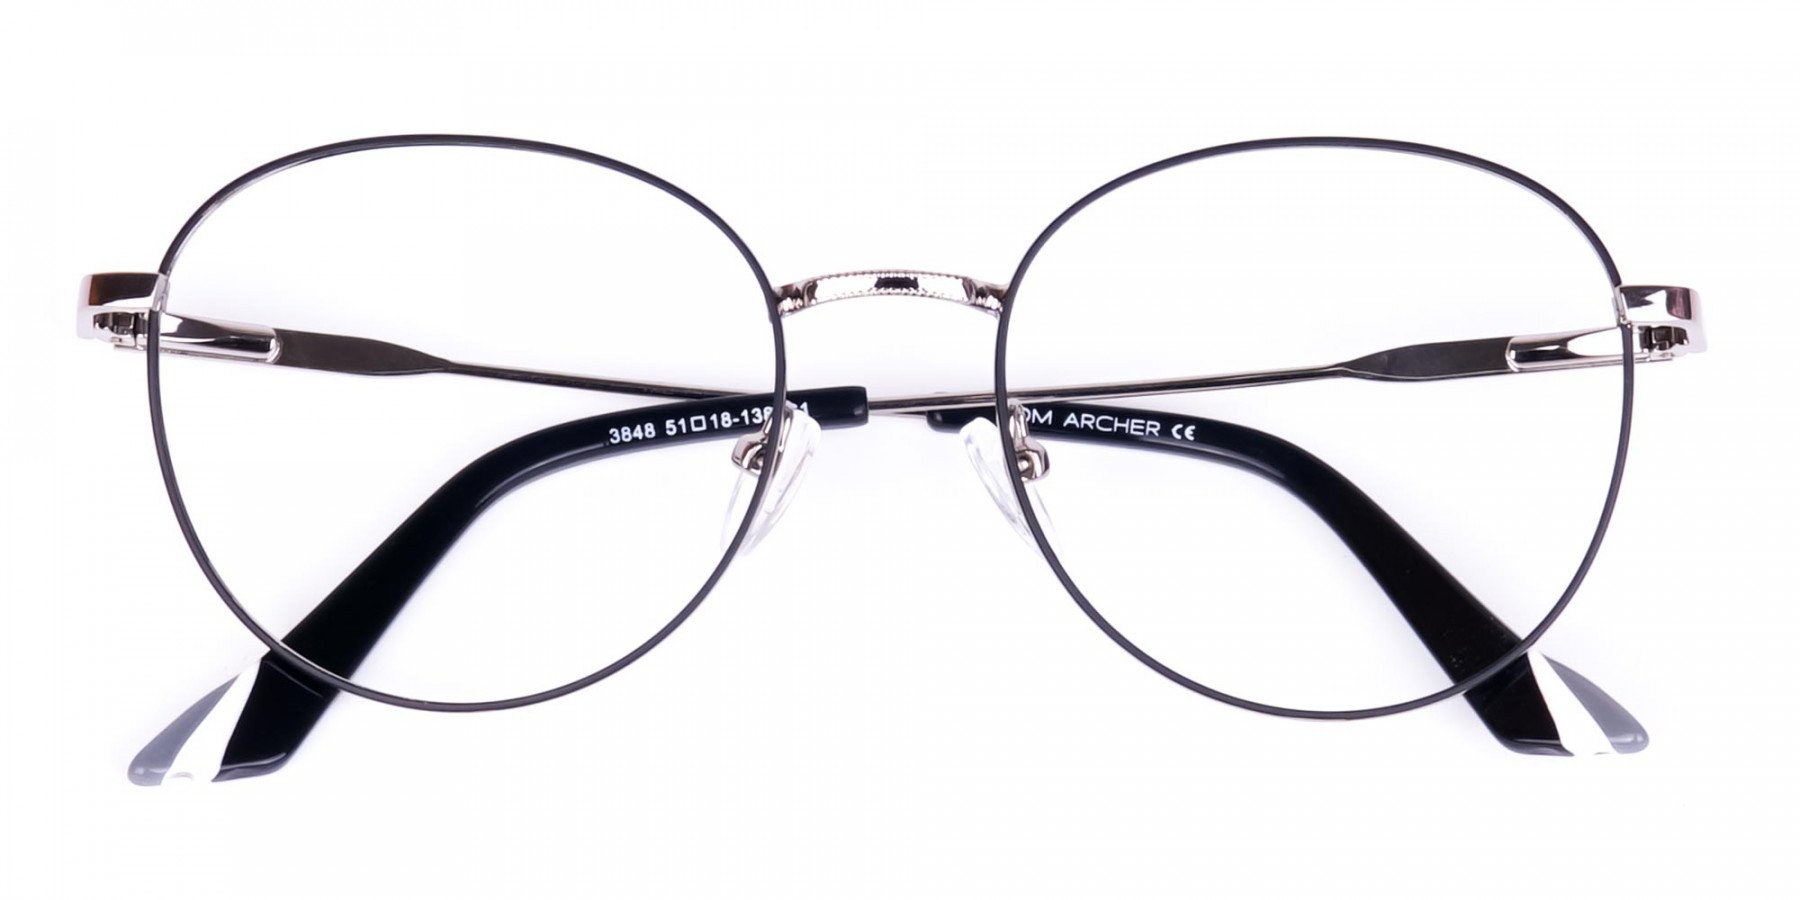 Classic-Black-and-Silver-Round-Glasses-1